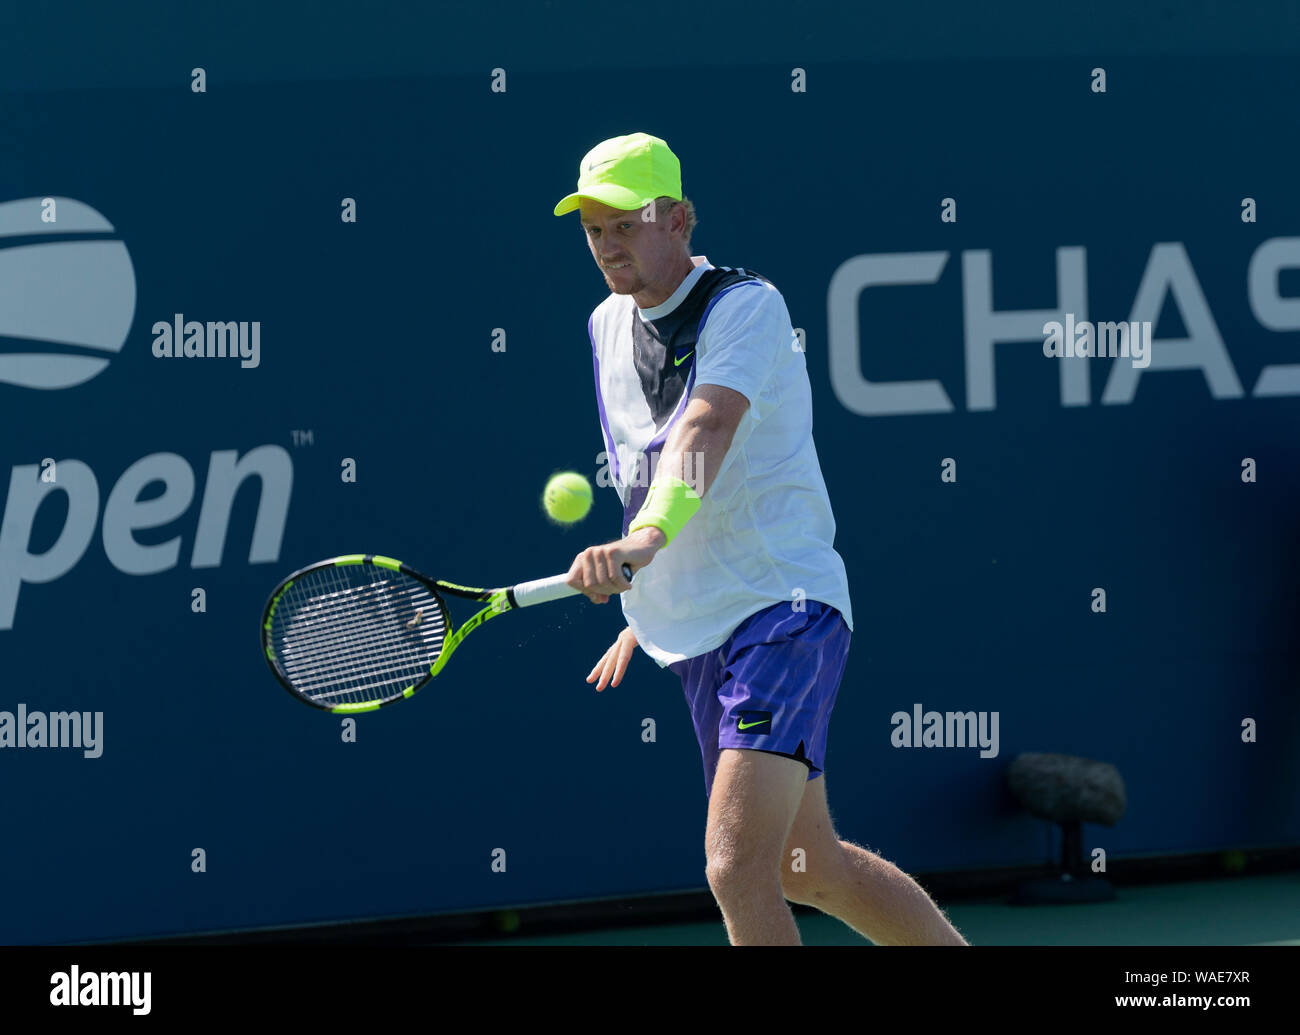 New York, NY - August 19, 2019: Alex Rybakov (USA) returns ball during qualifying round 1 of US Open Tennis Championship against Facundo Bagnis (Argentina) at Billie Jean King National Tennis Center Stock Photo